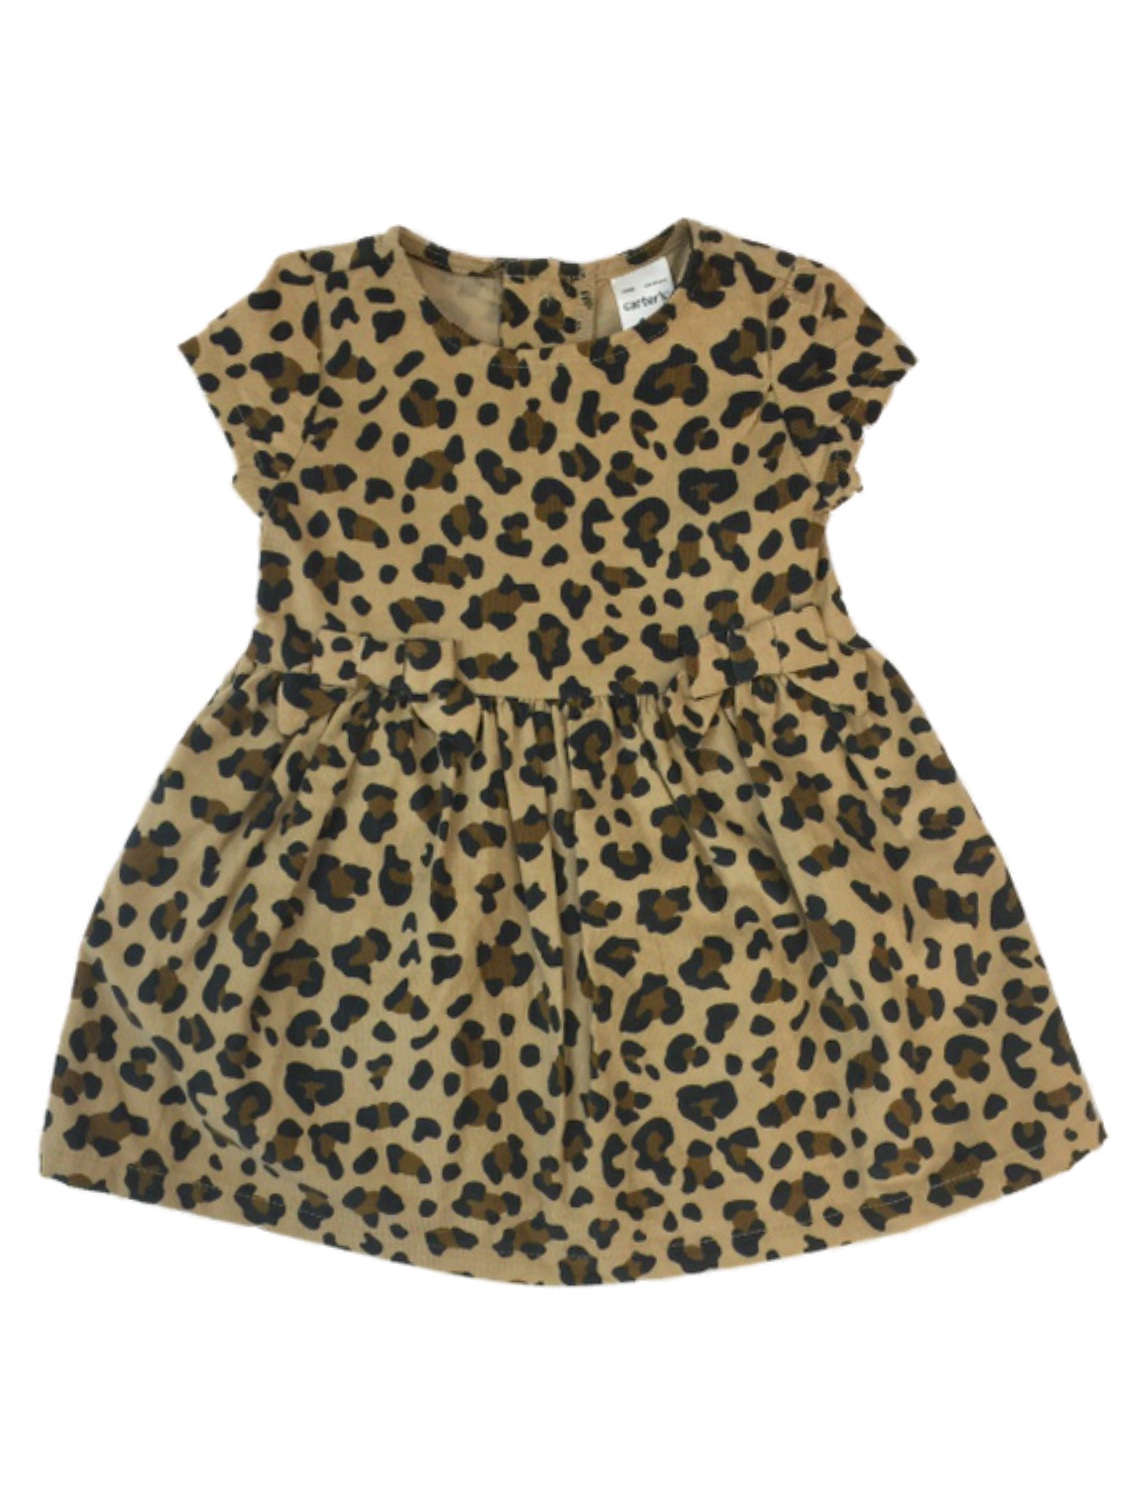 Carter's Carters Infant Girls Brown Leopard Corduroy Holiday Party Dress 6 Months